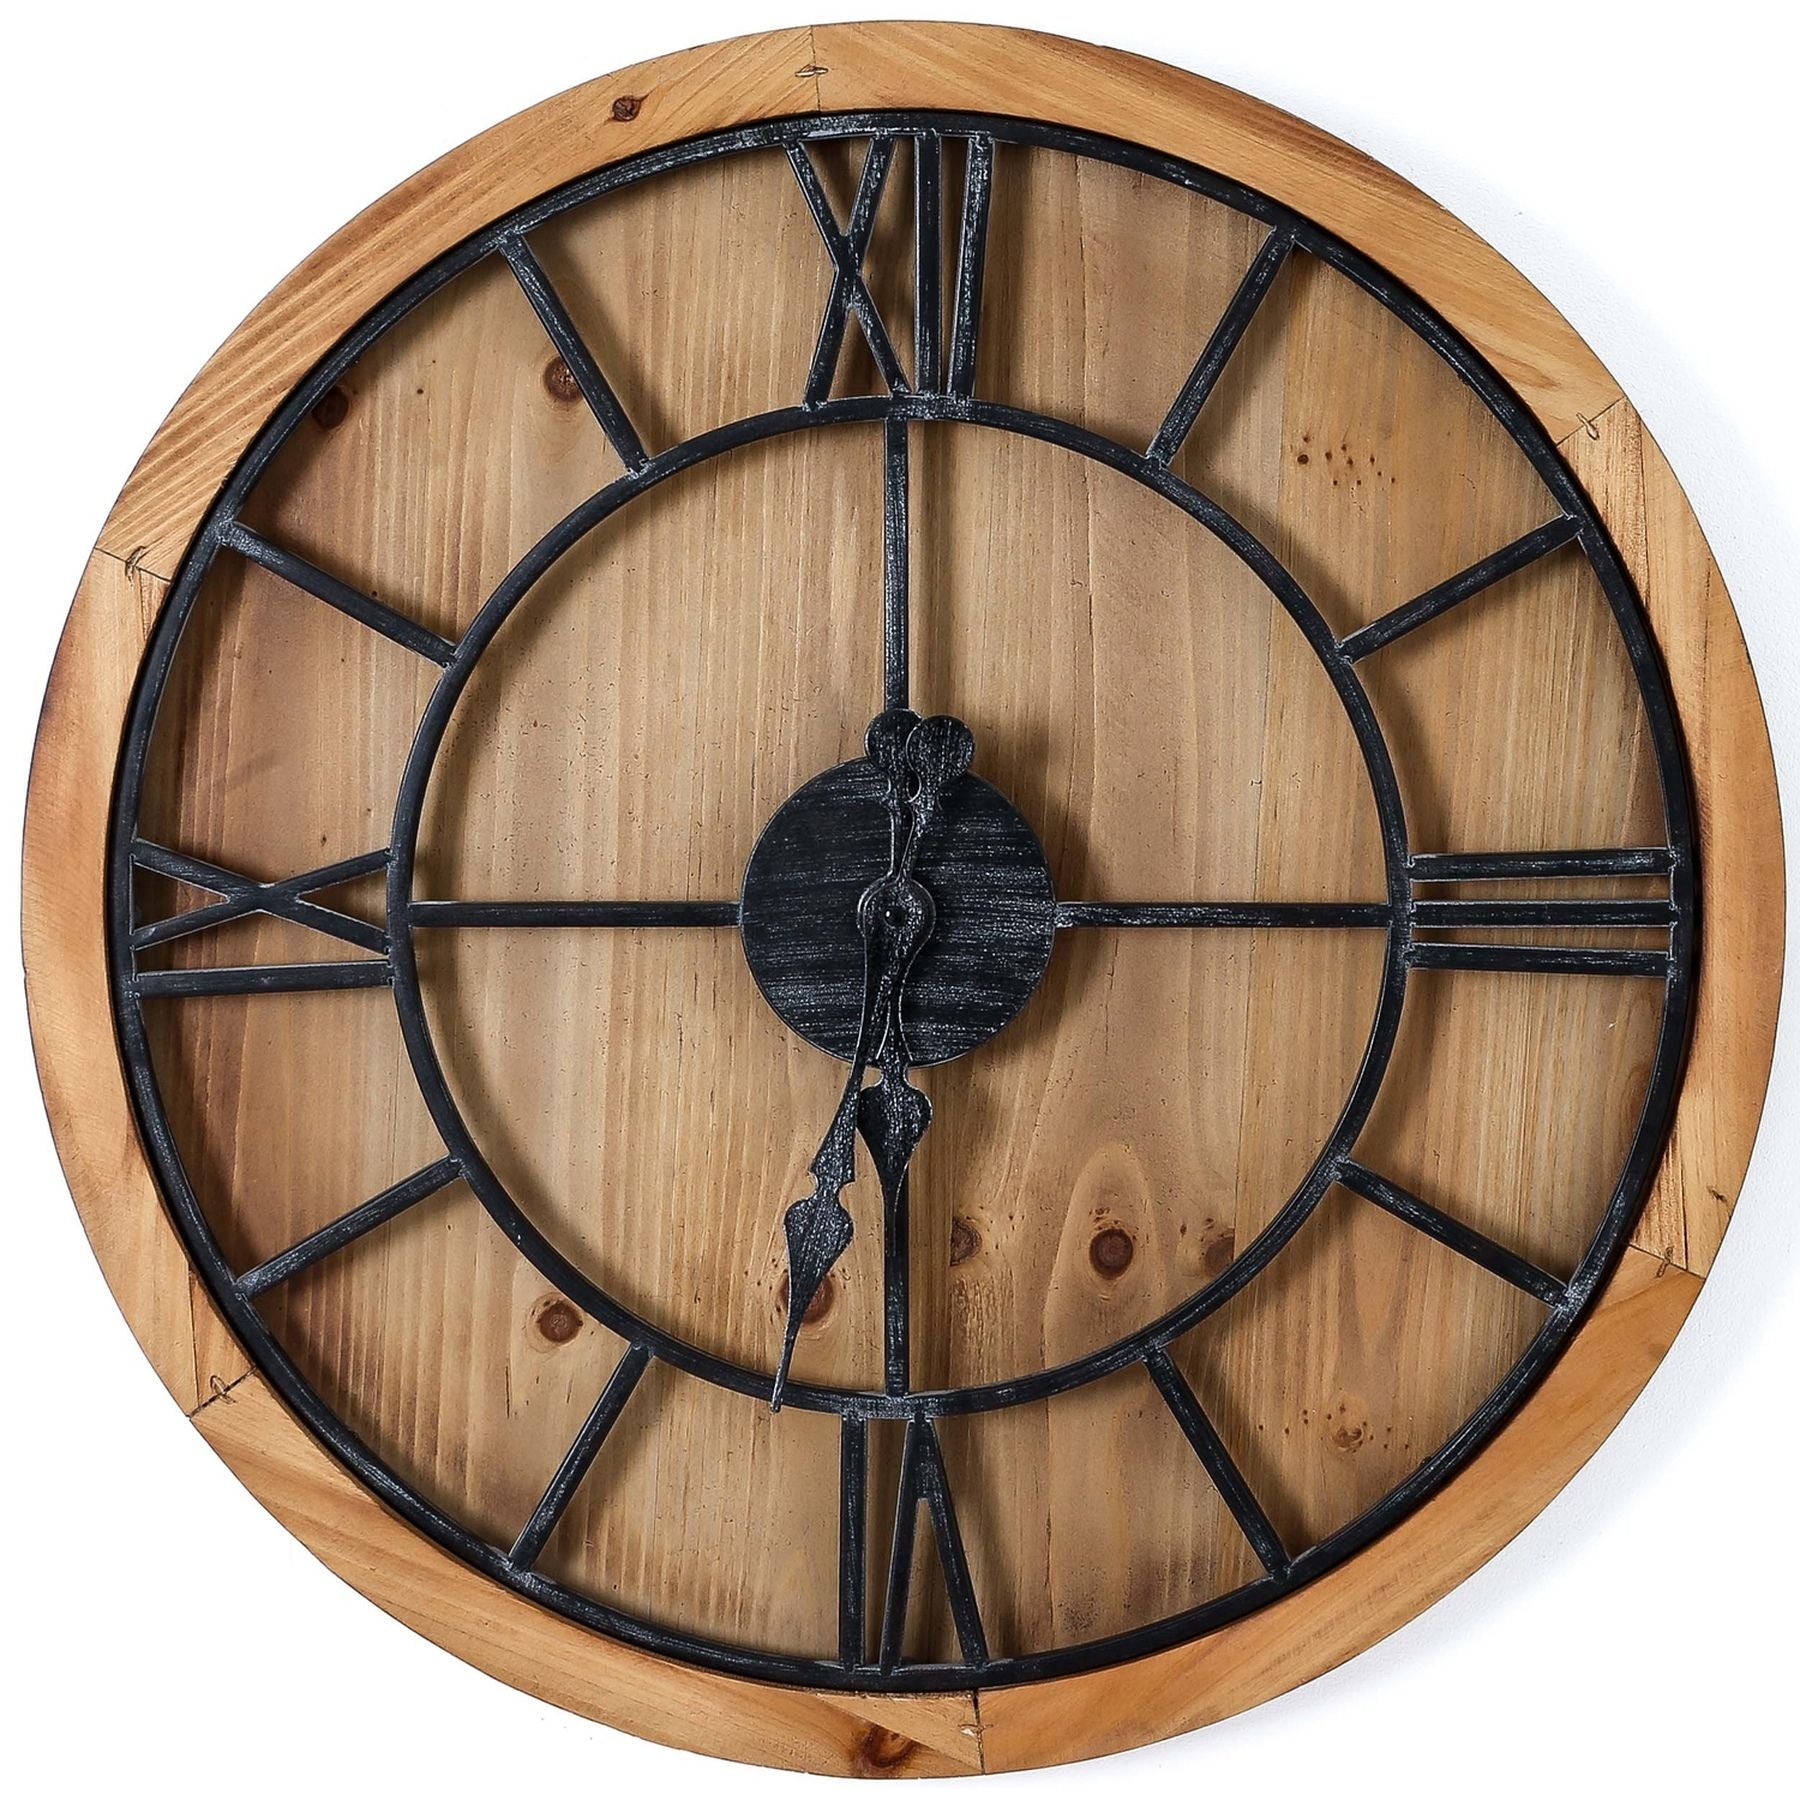 View Williston Large Wooden Wall Clock information